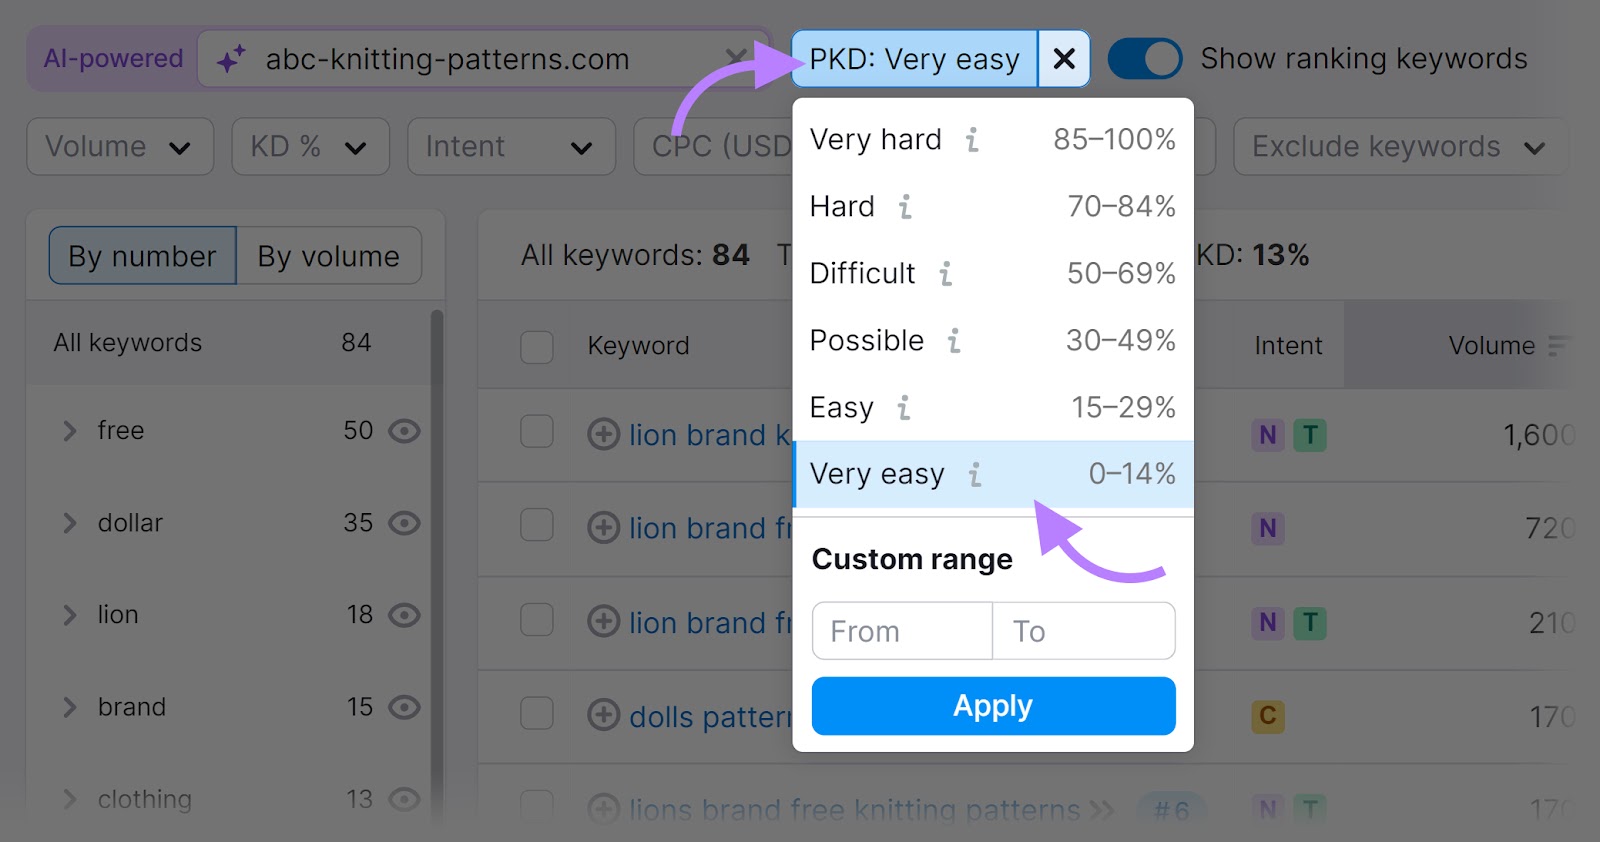 Keyword Magic Tool showing the "PKD" filter drop-down menu with the "Very easy" option selected.